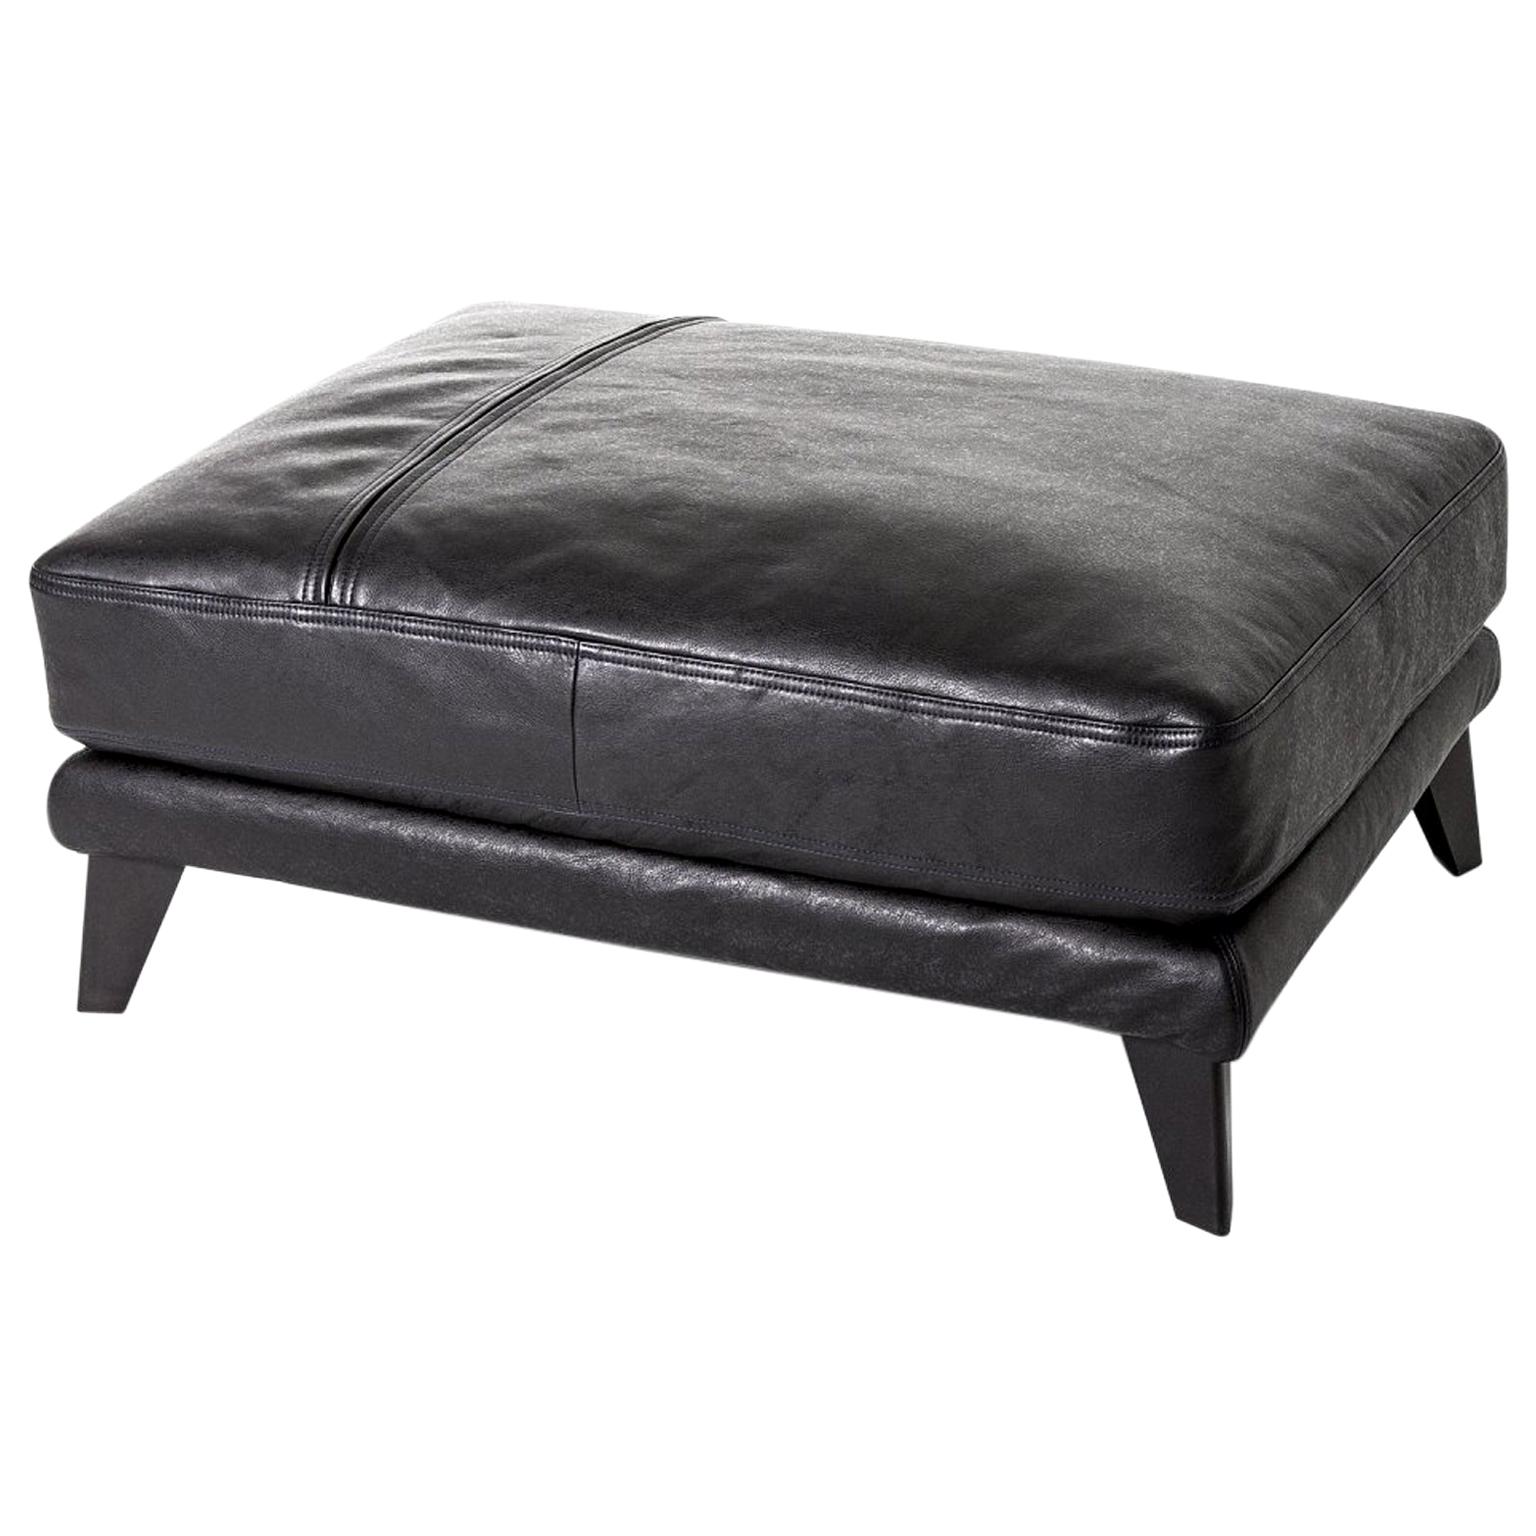 "Gimme More" Leather Covered Ottoman with Fiber or Goose by Moroso for Diesel